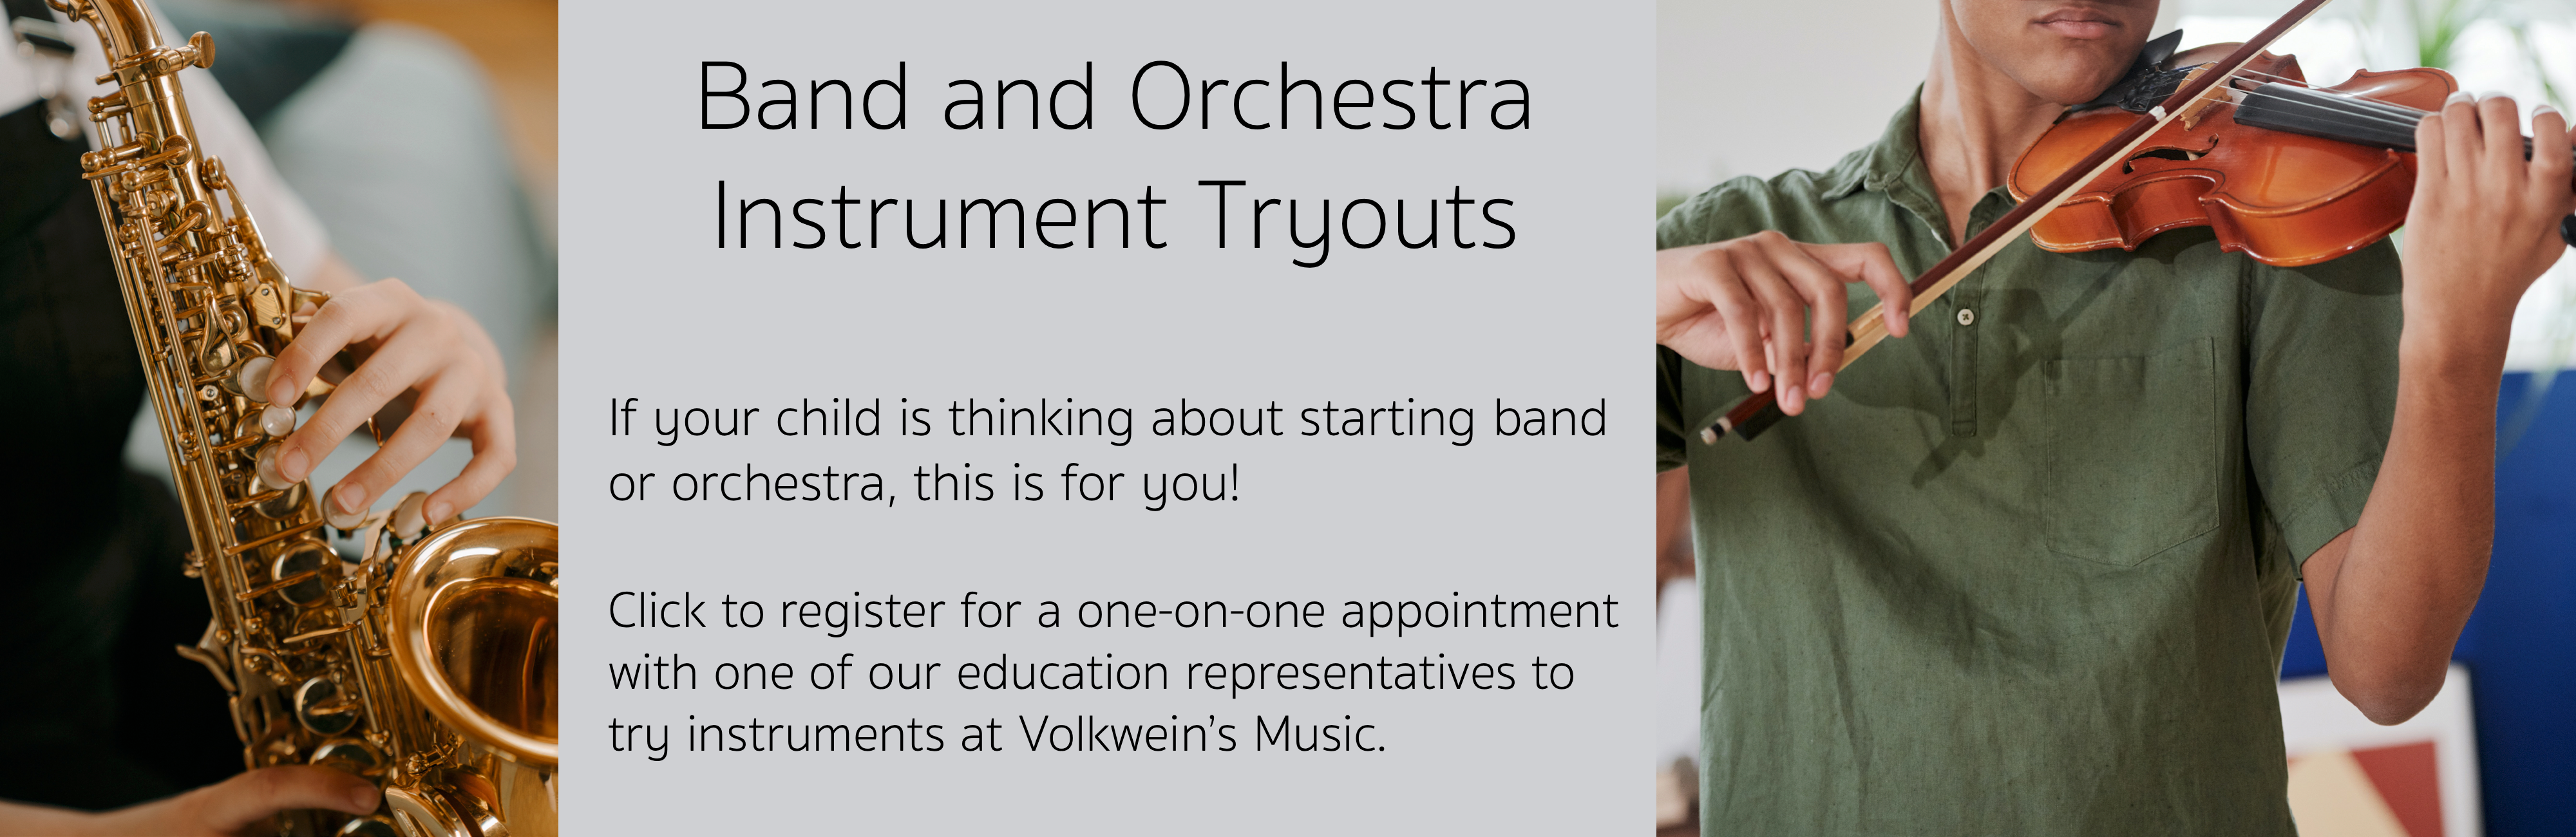 Instrument Tryouts